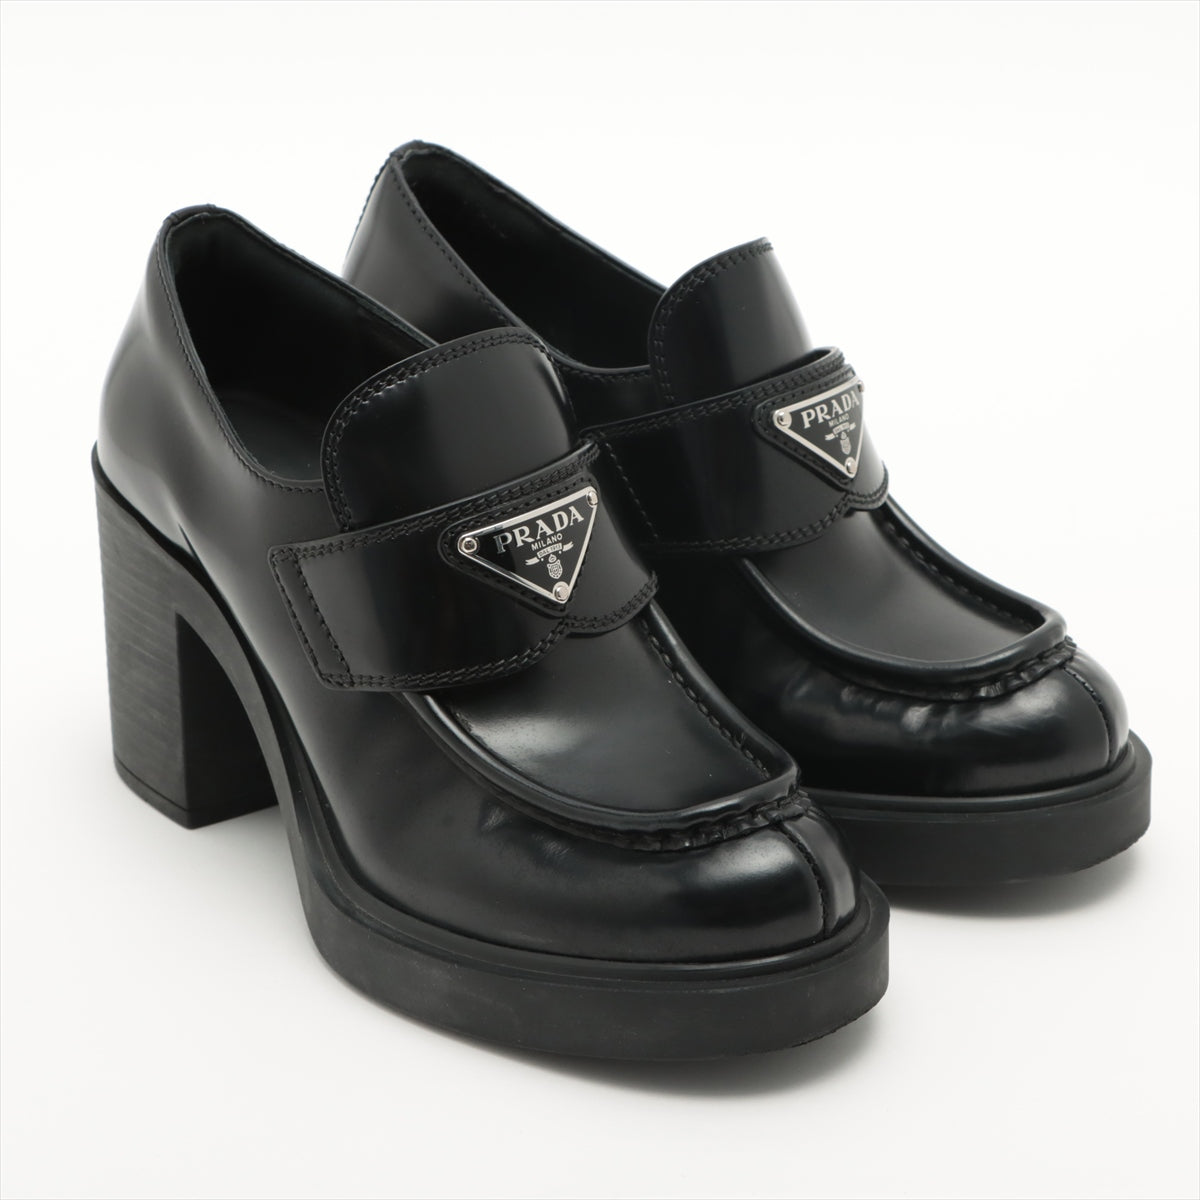 Prada Leather Pumps 36 Ladies' Black box There is a bag